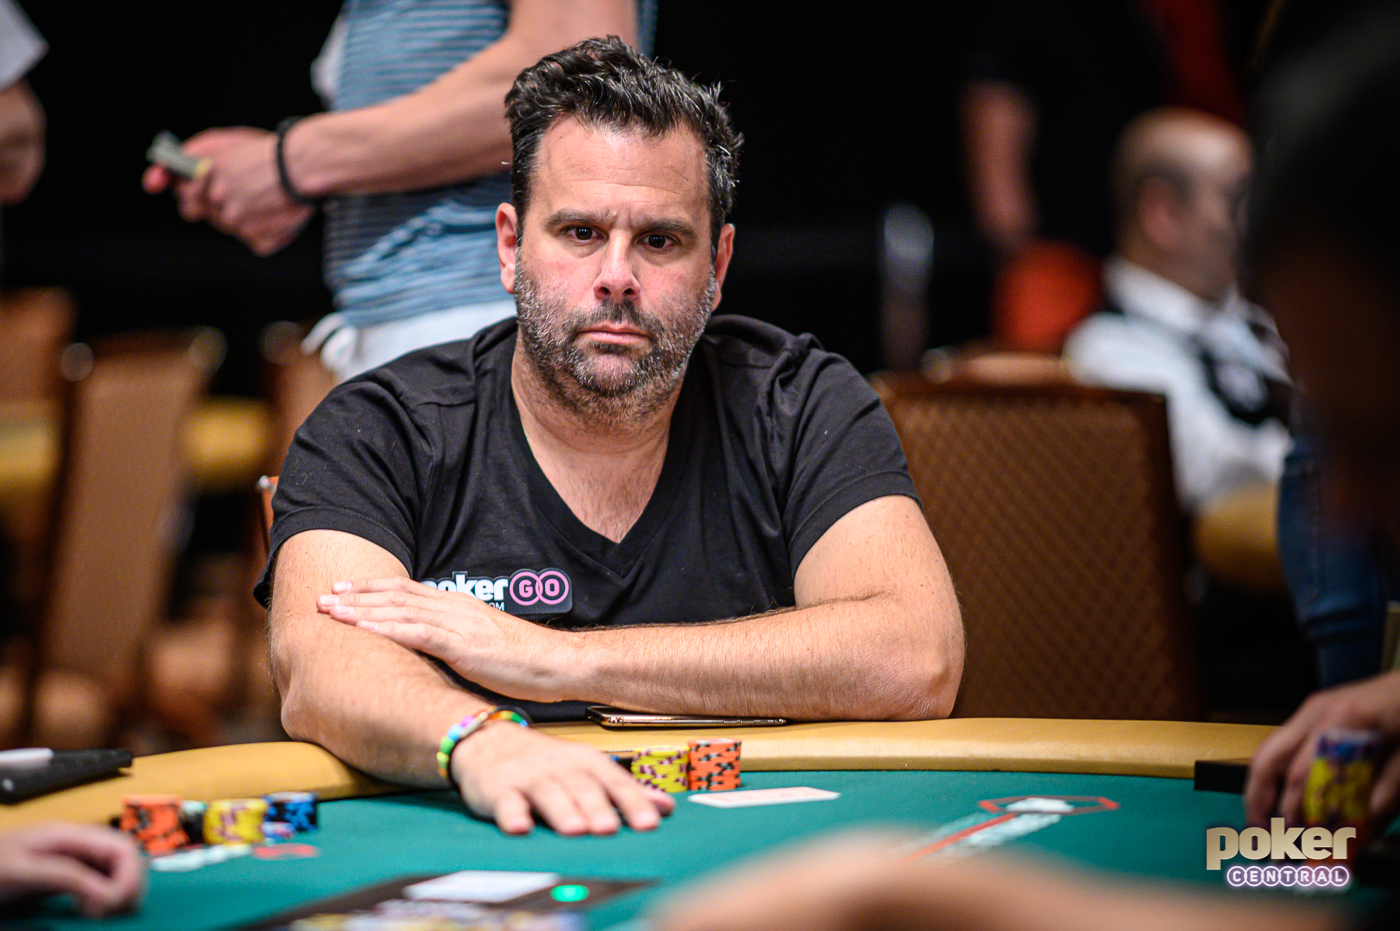 Focused and determined: Randall Emmett during the $5,000 No Limit Hold'em event at the 2019 WSOP.